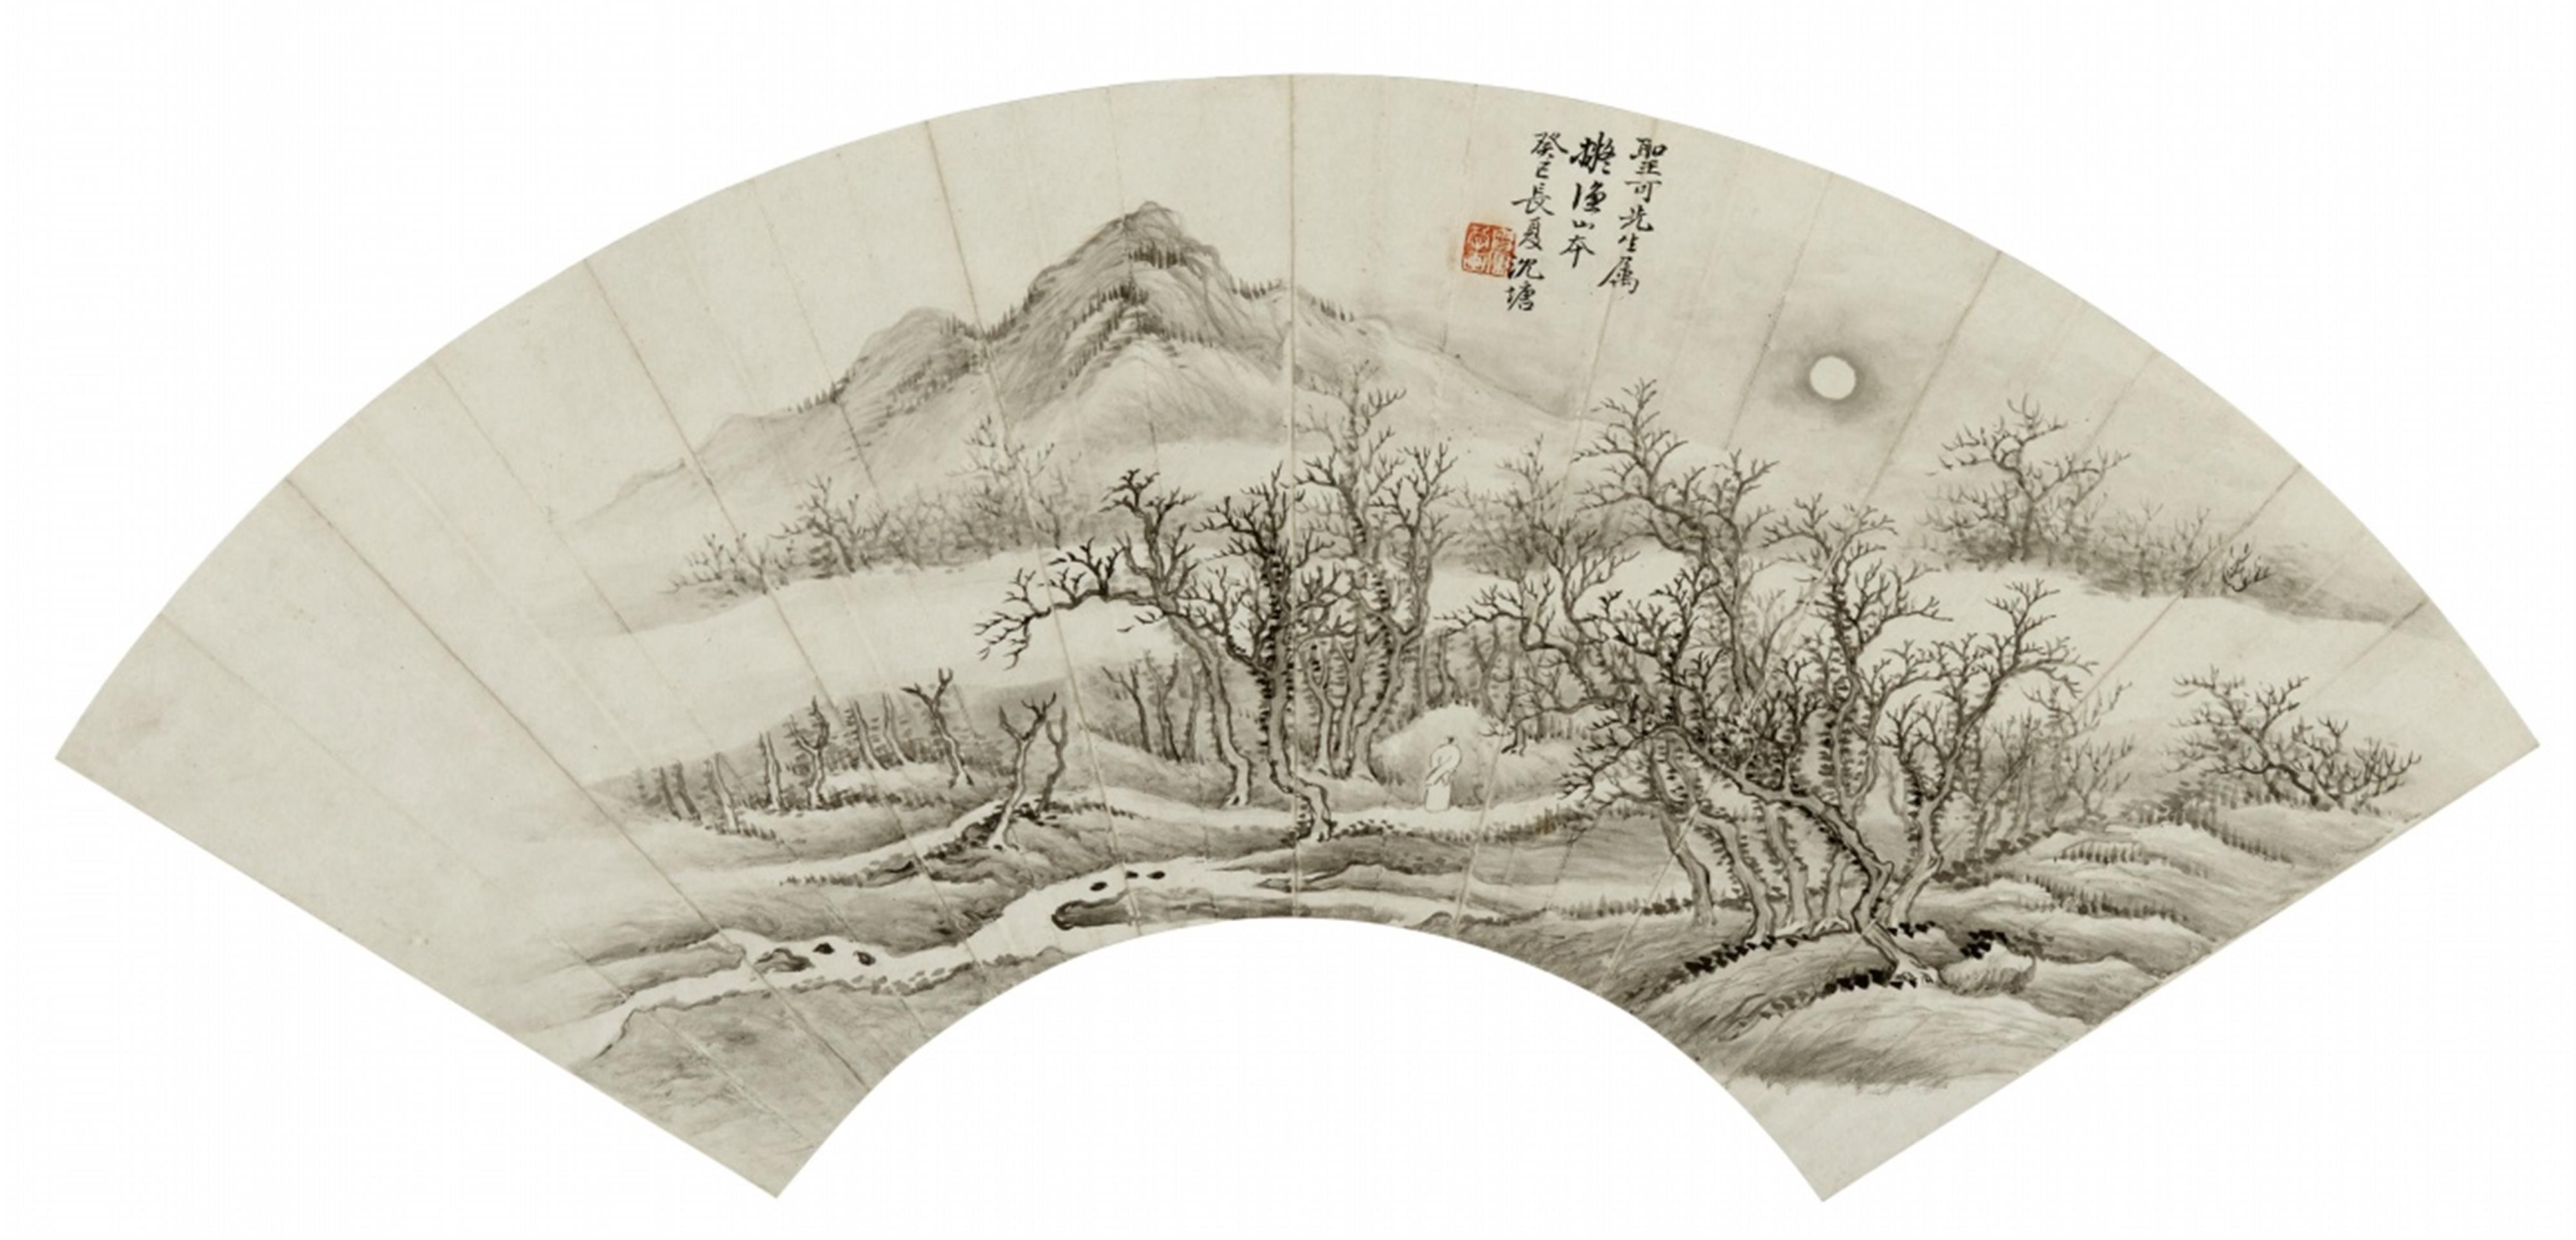 Shen Tang
Chen Pu - Two fan paintings. a) A man in a landscape looking at the full moon. Ink on paper. Inscription, dated cyclically guisi (1893), signed Shen Tang and sealed Xue Lu zi hua. b) Rock... - image-1